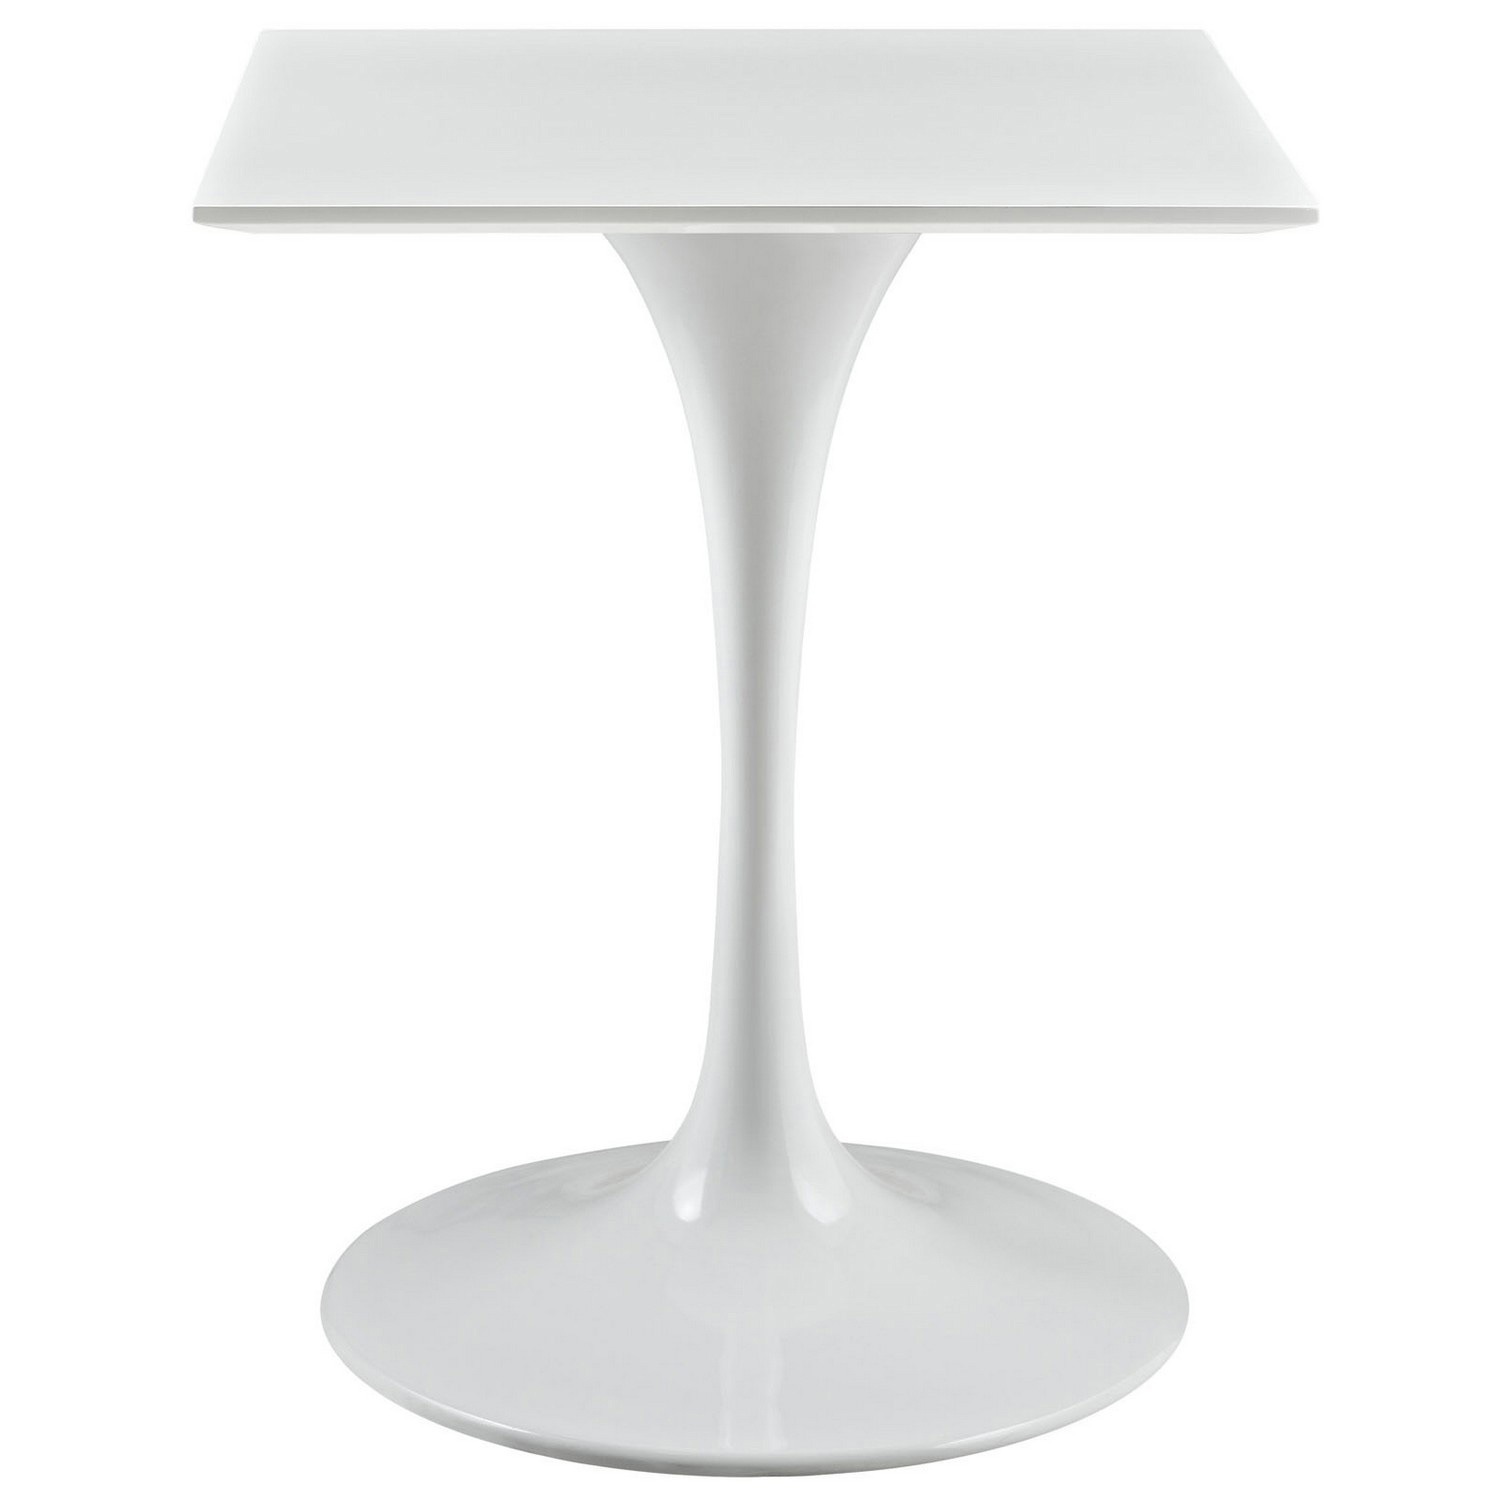 Modway Lippa 24 Wood Top Dining Table - White